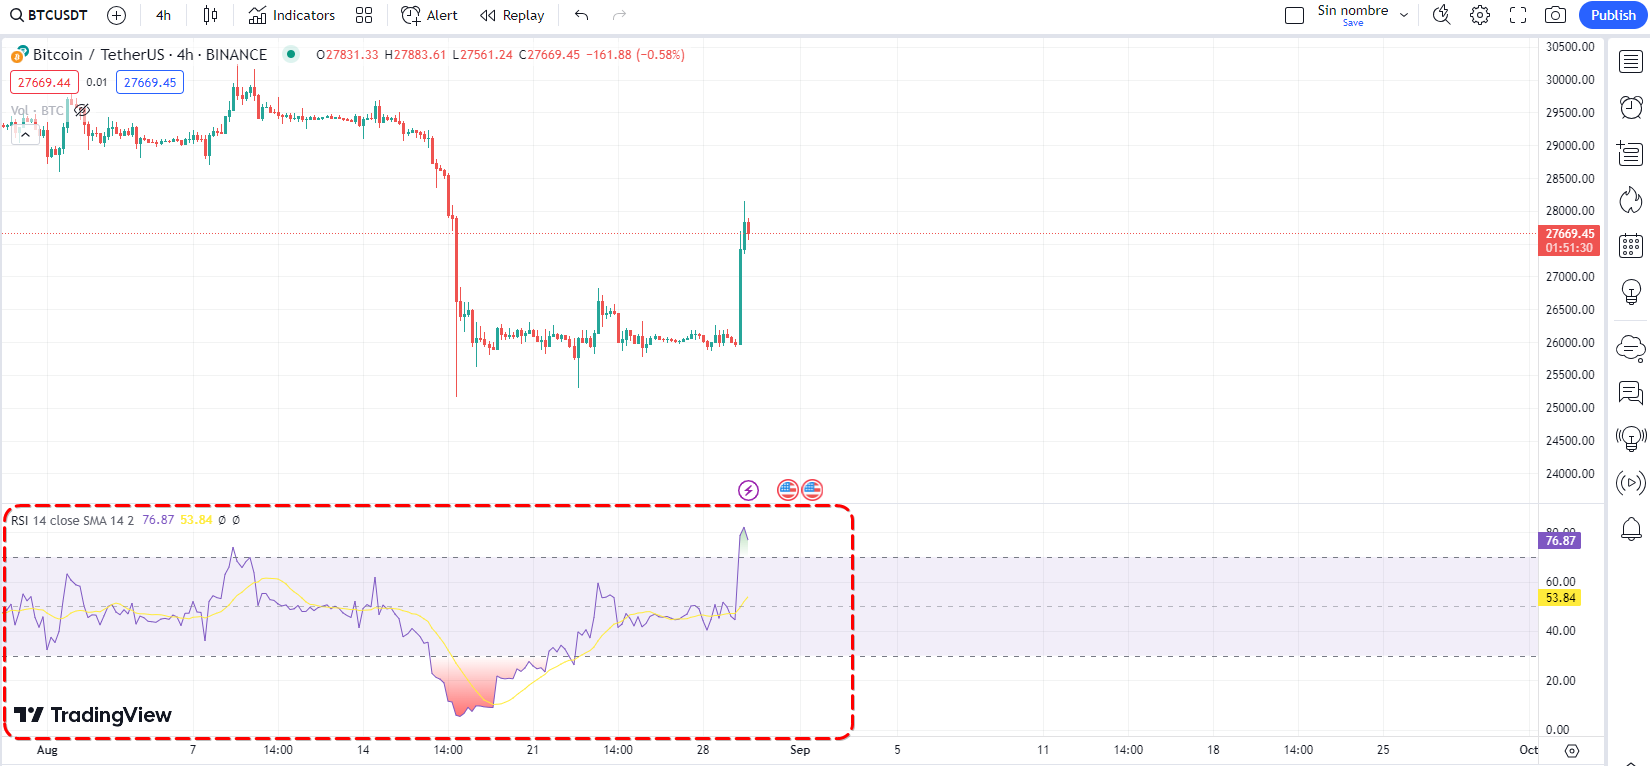 The RSI indicator in the TradingView interface